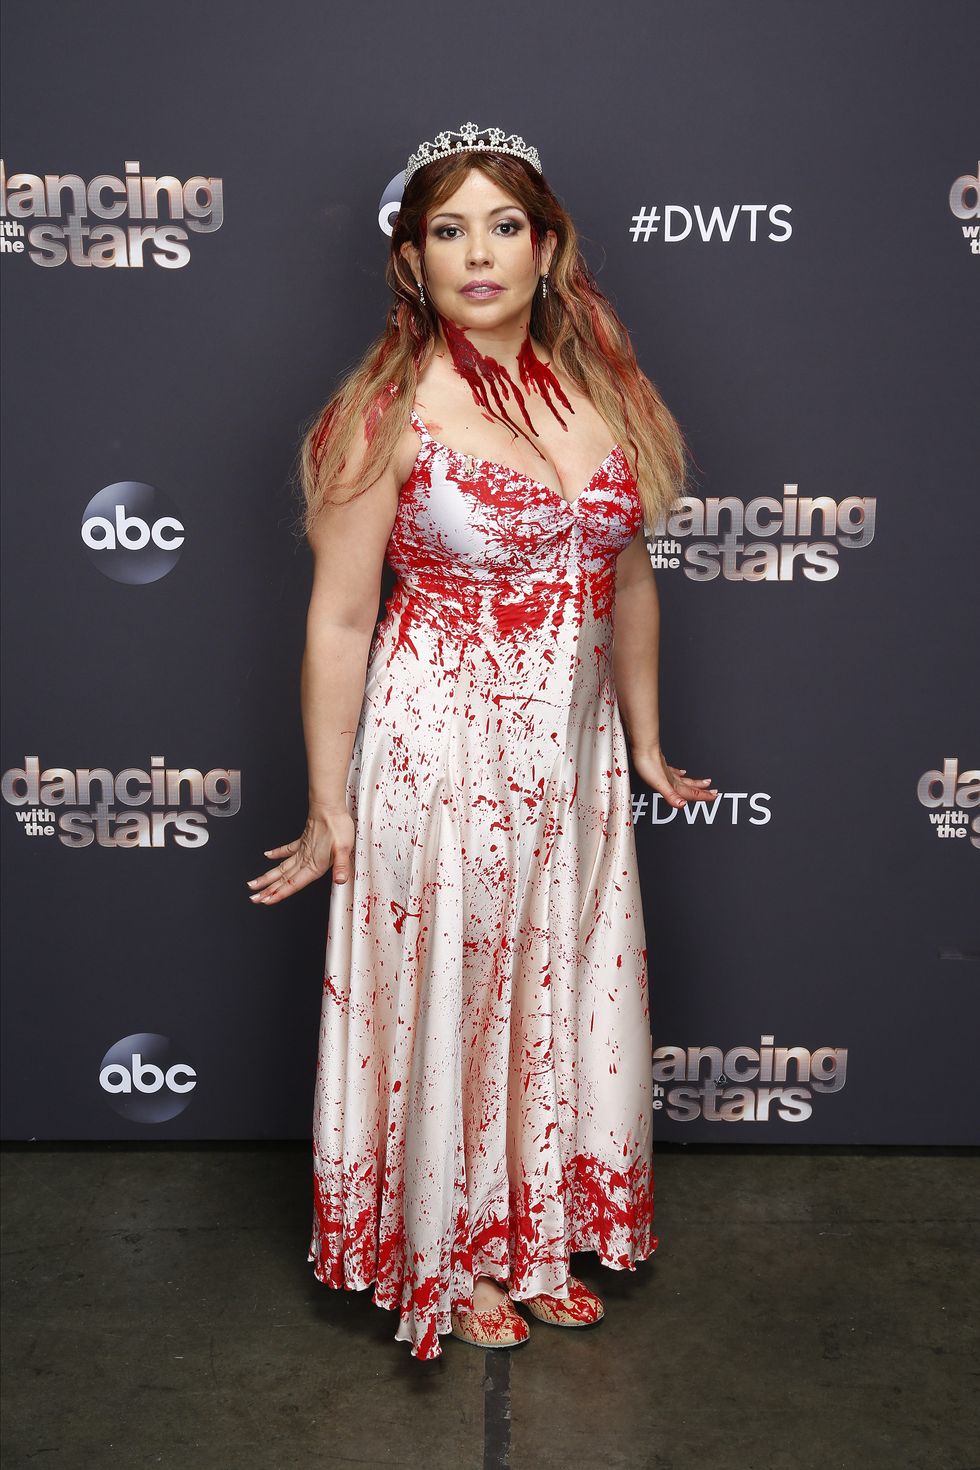 dancing with the stars villains night just in time for halloween, 10 celebrity and pro dancer couples find their inner villain as they compete for this seasons seventh week live, monday, oct 26 800 1000 pm edt, on abc kelsey mcnealabc via getty images justina machado